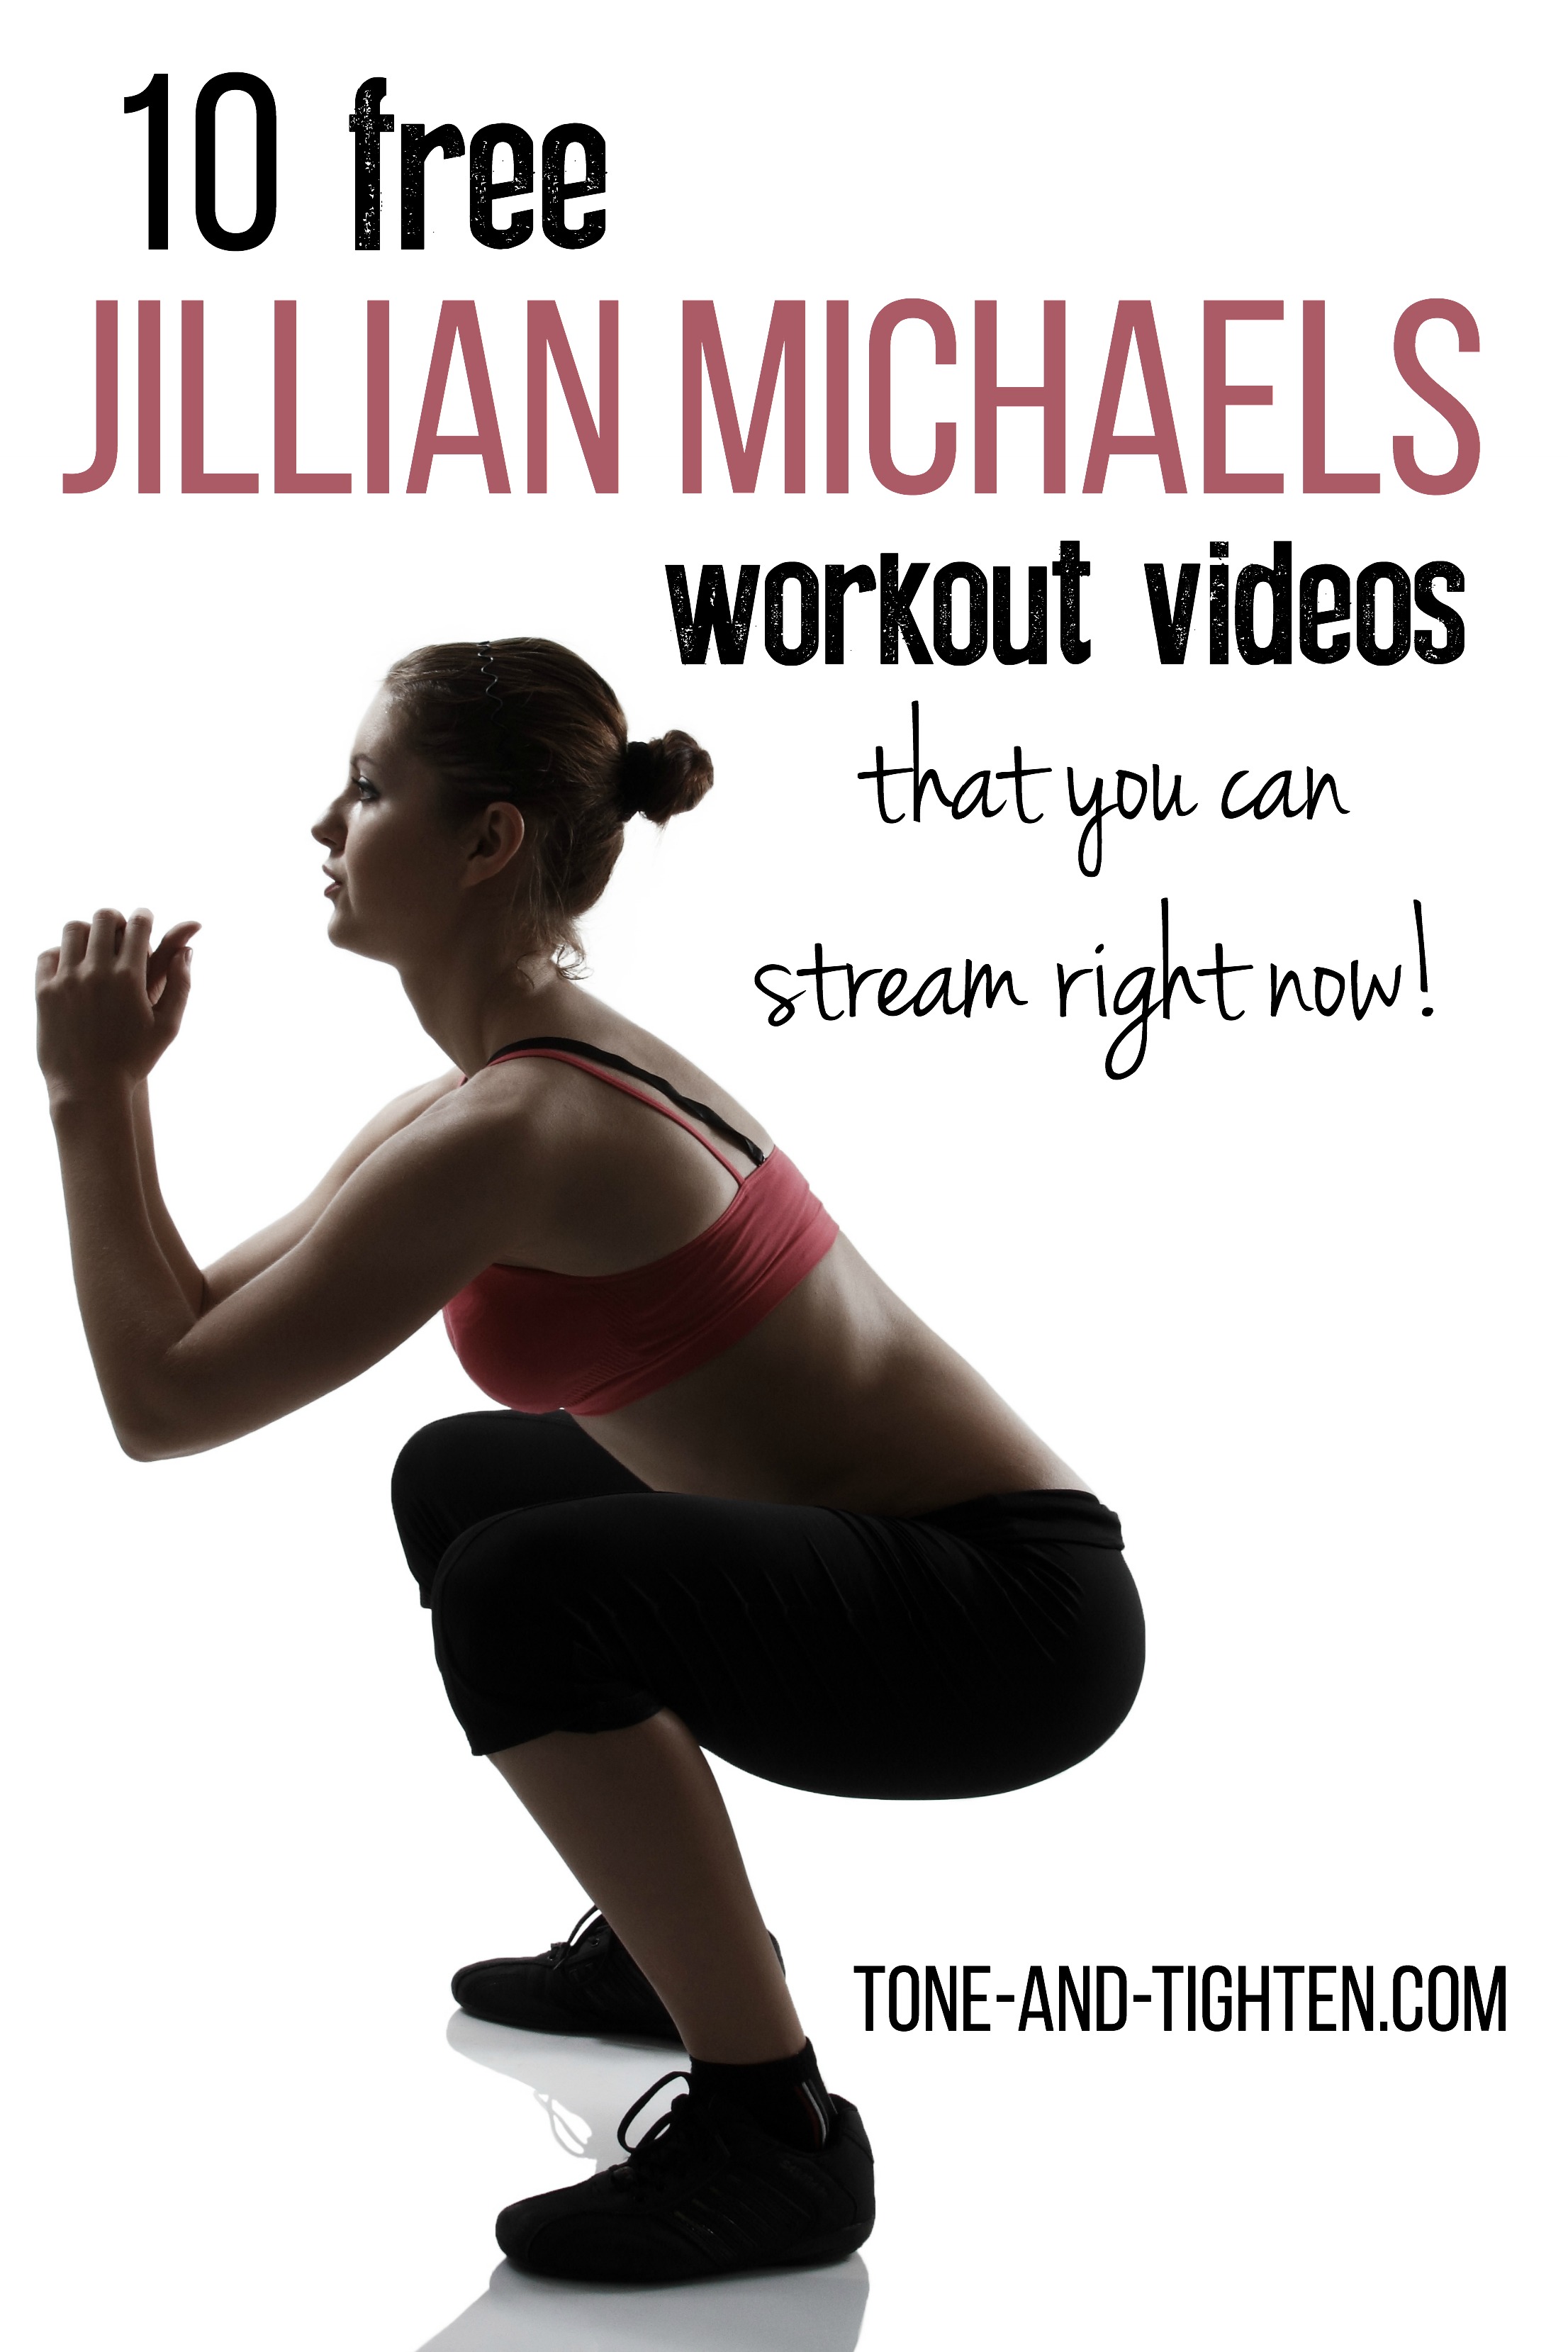 5 Day Jillian Michaels Ab Workout Level 1 for Push Pull Legs